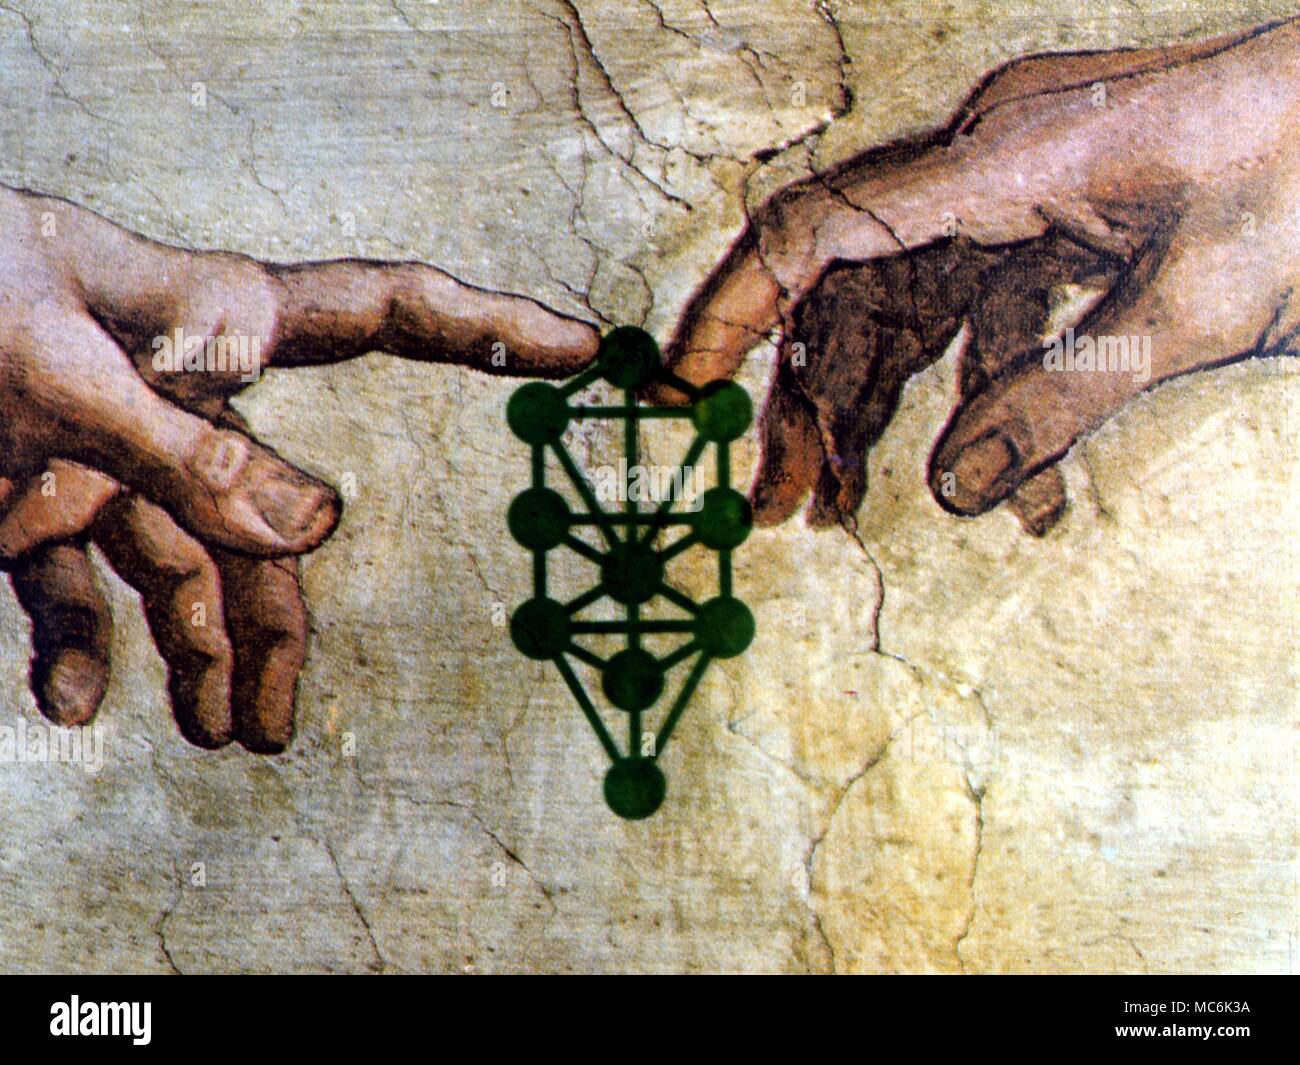 Cabbala Sephirothic Tree and Creative Hand Sephirothic Tree of the Cabbalisitc system overlaid on the famous detail of the hand of God touching that of Adam Cabbala n : sometimes called Kabbalah has two meanings; the first being a body of mystical teachings of rabbinical origin, which are based on an esoteric interpretation of the Hebrew Scriptures. The Cabbala is also known as a secret doctrine resembling these teachings. A traditionally secret esoteric or occult matter The Sephirothic Tree consists of ten globes of luminous splendor arranged in three vertical columns and conne Stock Photo